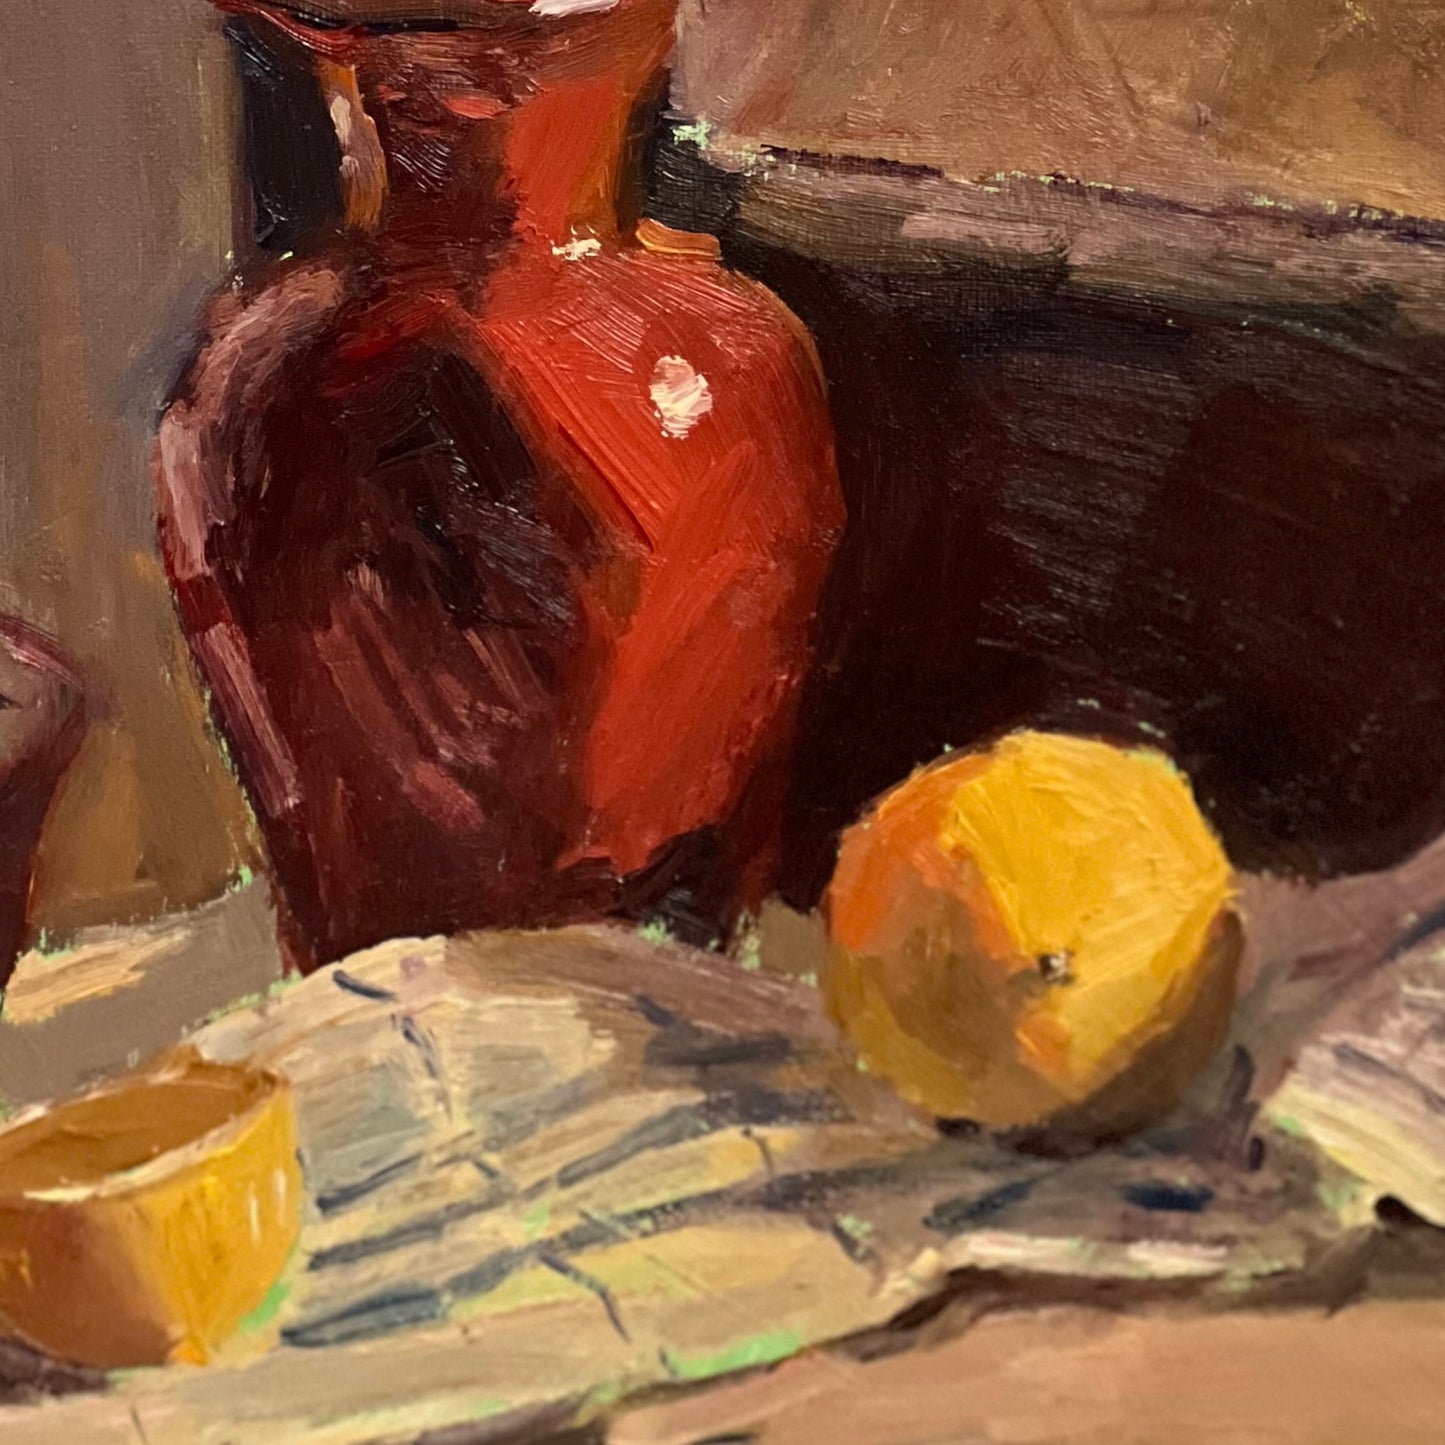 Lemons with Red in the morning sun - still life oil painting